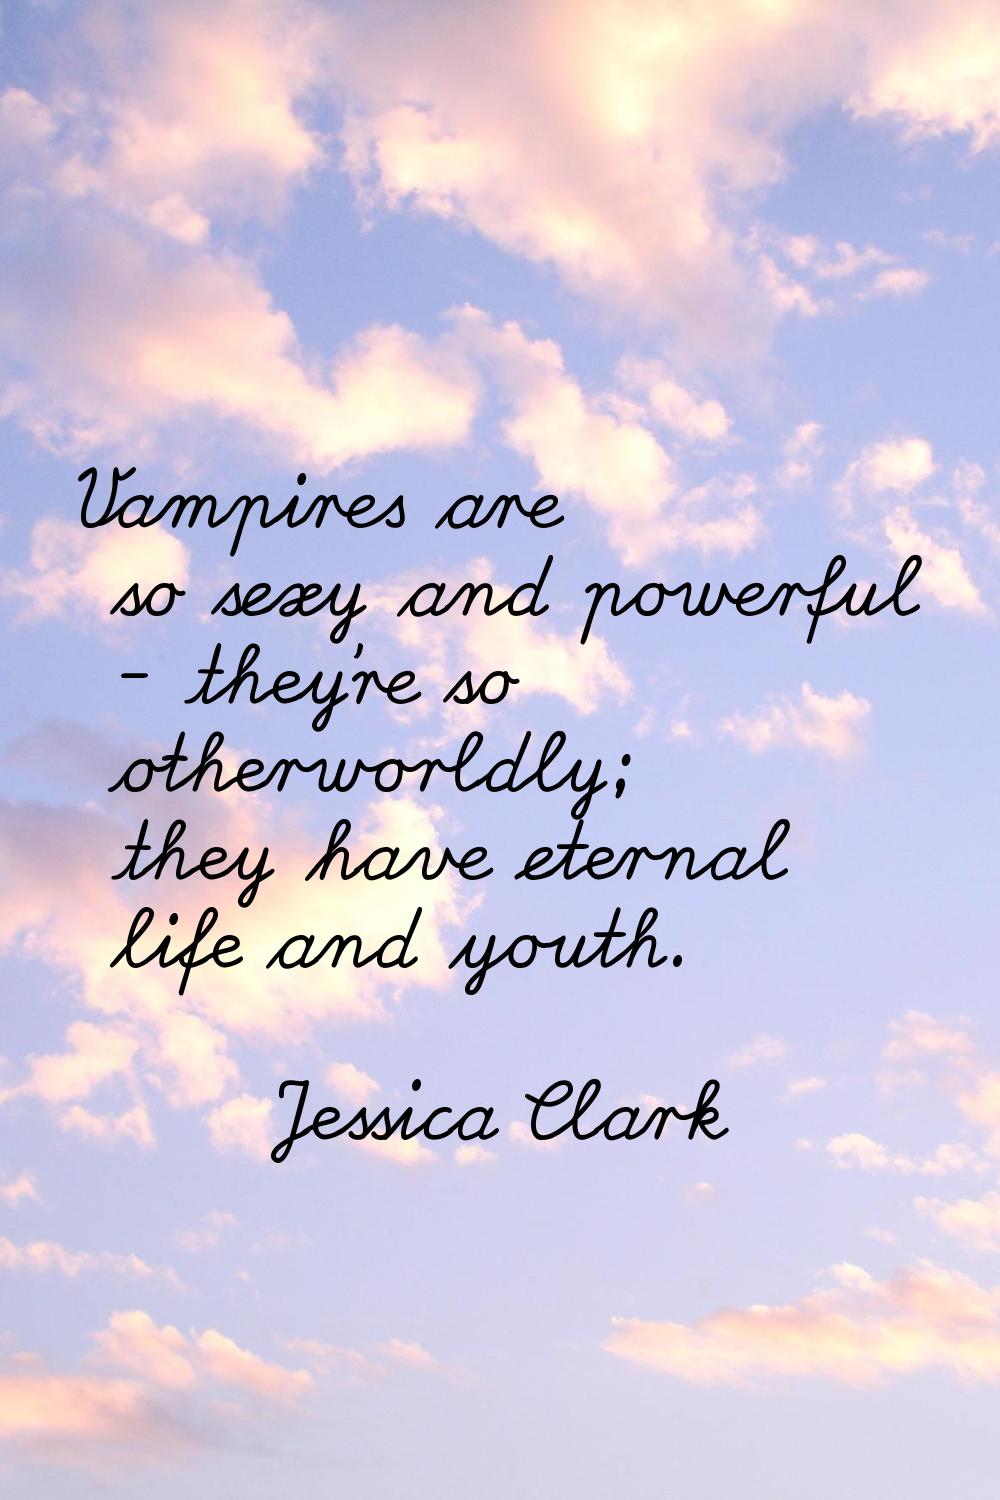 Vampires are so sexy and powerful - they're so otherworldly; they have eternal life and youth.